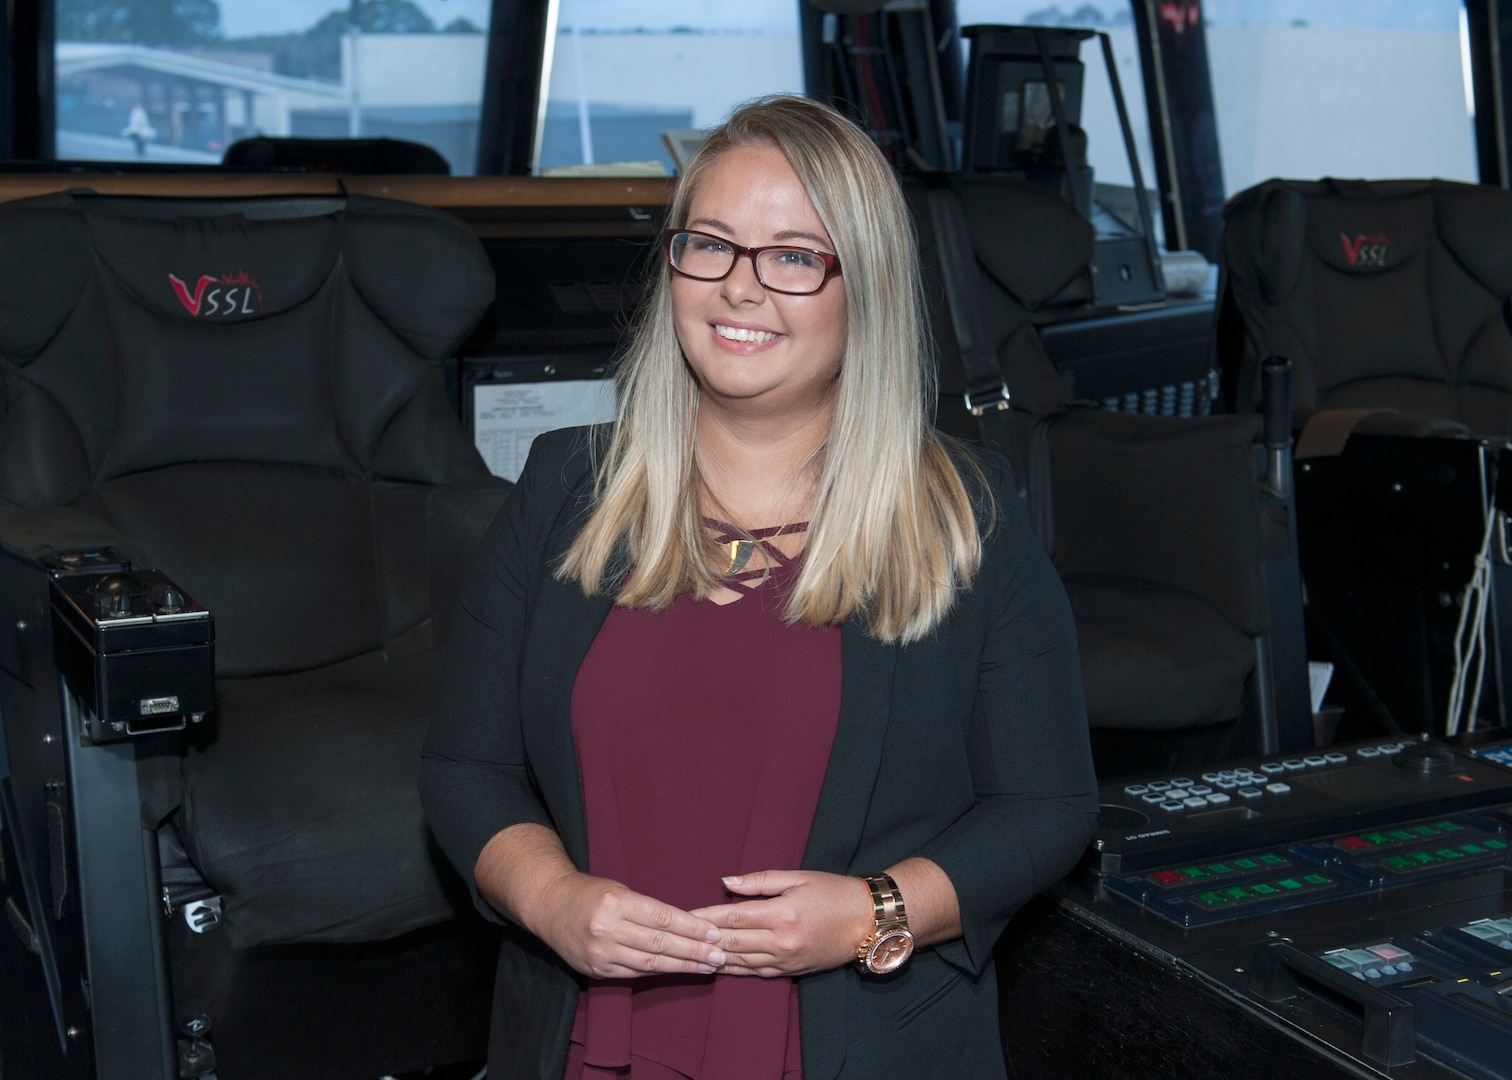 Nicole Waters, NSWC PCD branch head and former Advanced Mine Simulation System (AMISS) test director, received the Department of the Navy Test and Evaluation Team Award.